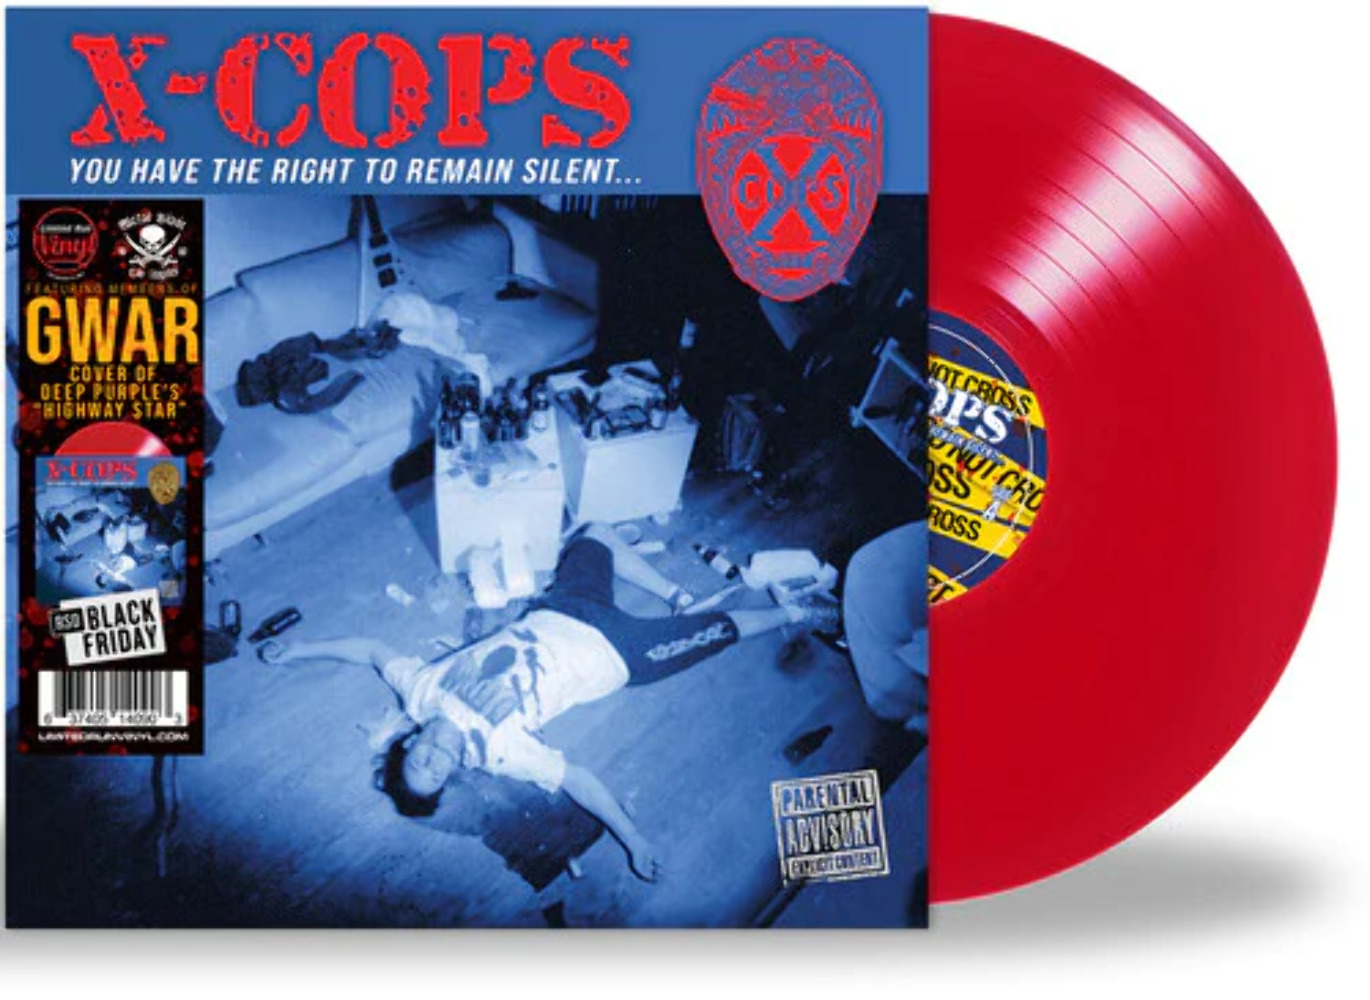 X-Cops - You Have The Right To Remain Silent [Red Vinyl] NEW Vinyl